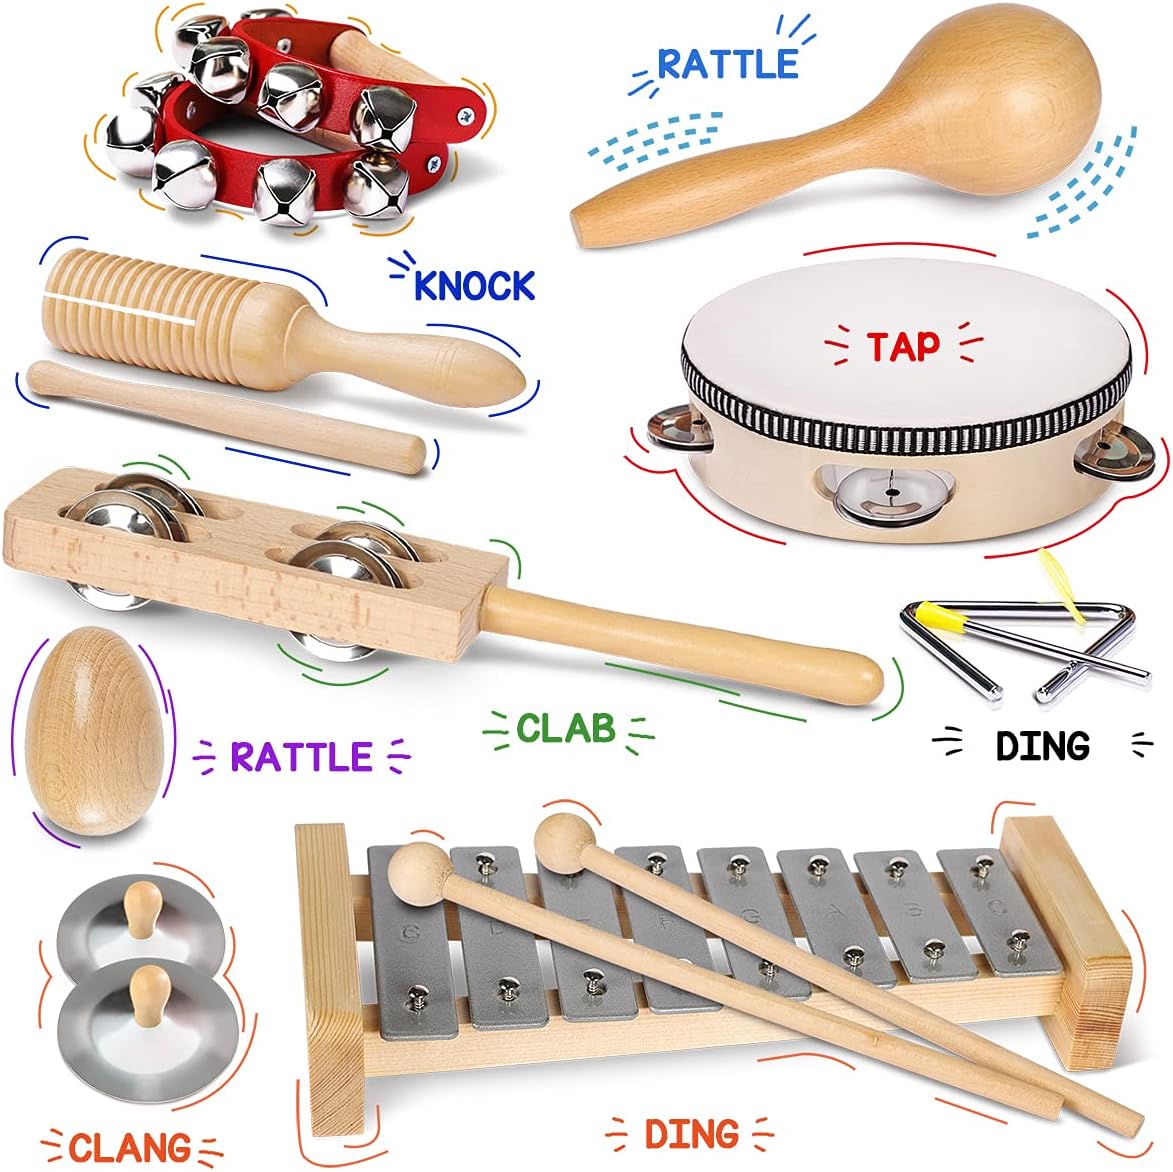 LOOIKOOS Toddler Musical Instruments International Natural Wooden Music Set for Toddlers and Kids-Eco Friendly Preschool Educational Musical Toys with Storage Bag